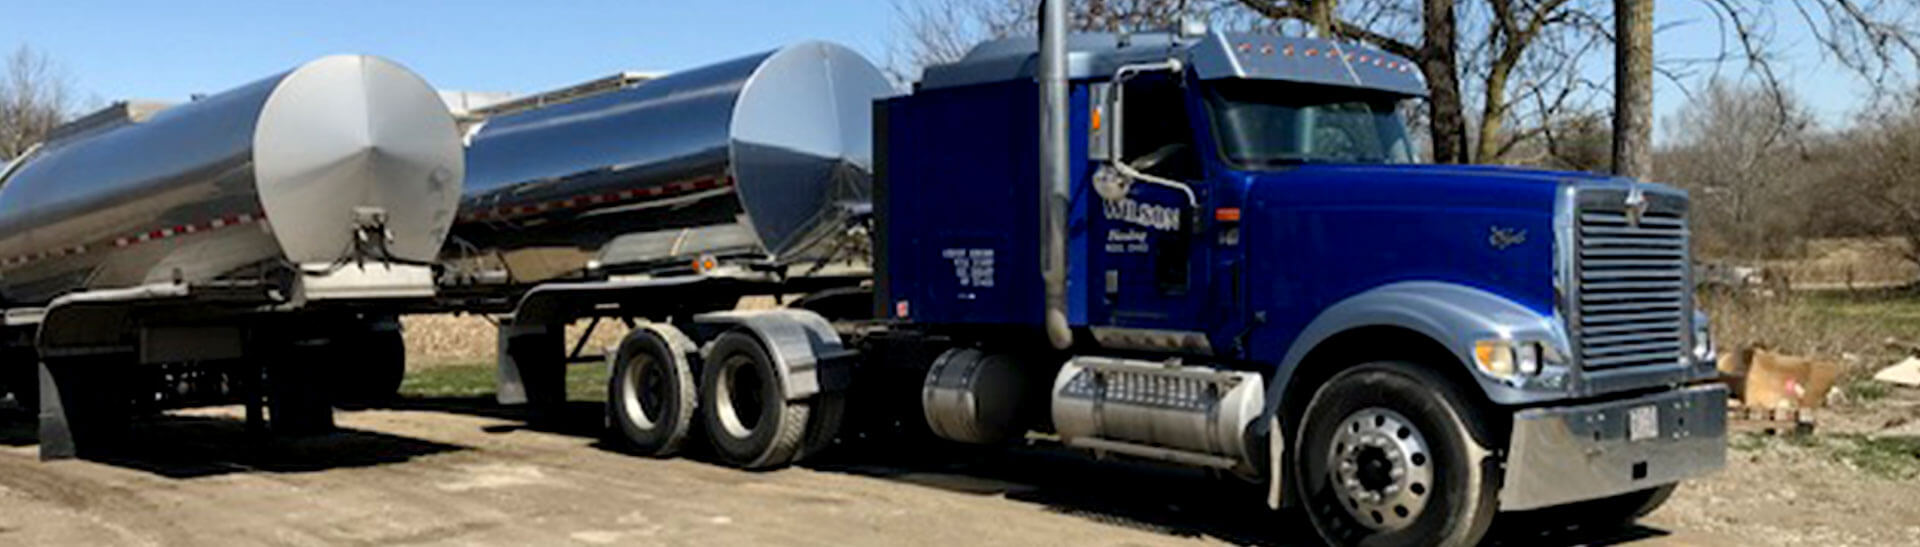 Lexington, KY Trucking Company and Trucking Services